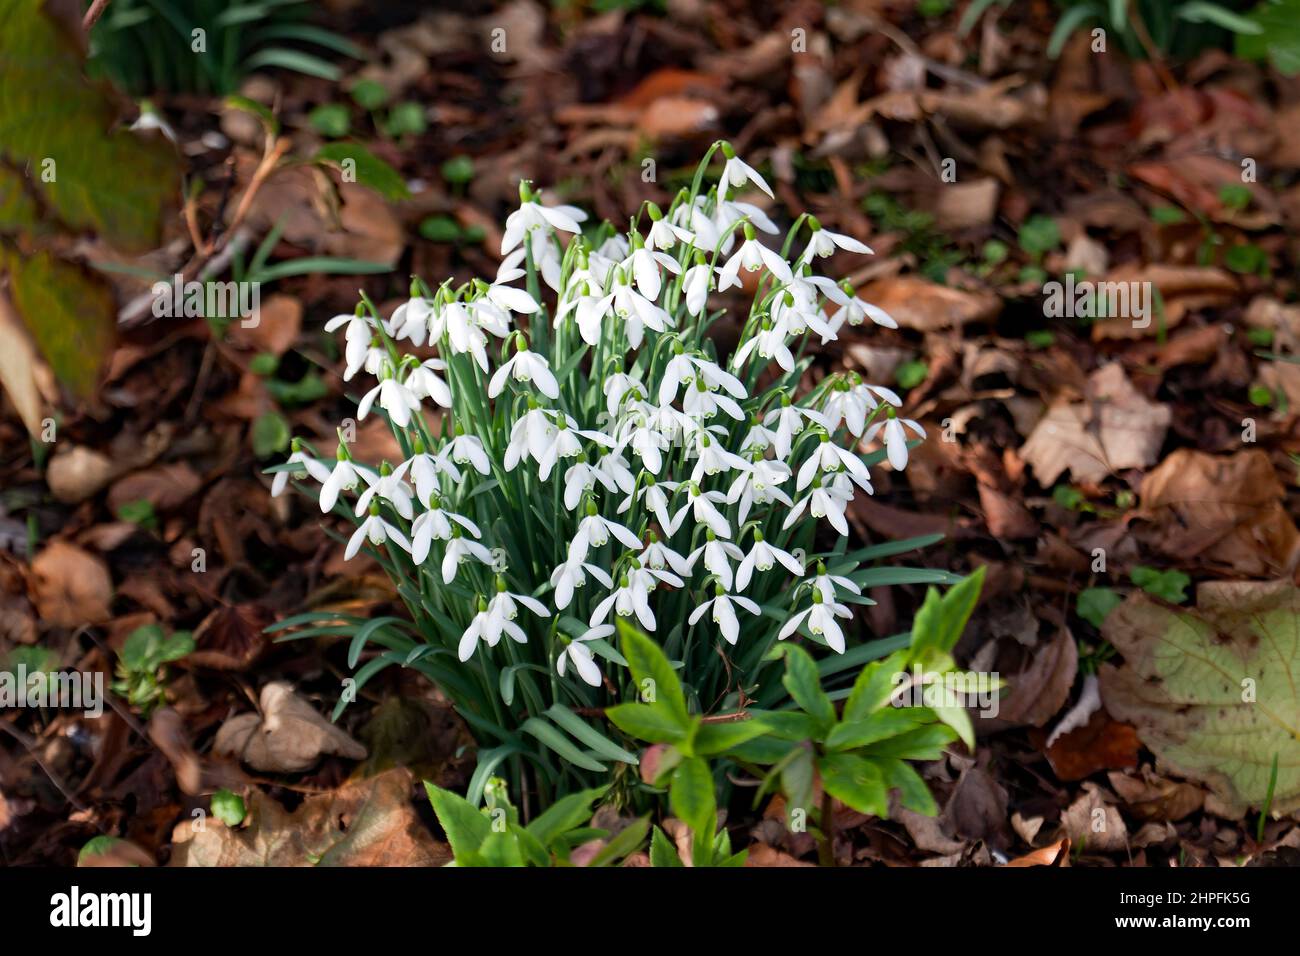 Display of Snowdrops in the Gardens at Walmer Castle Stock Photo